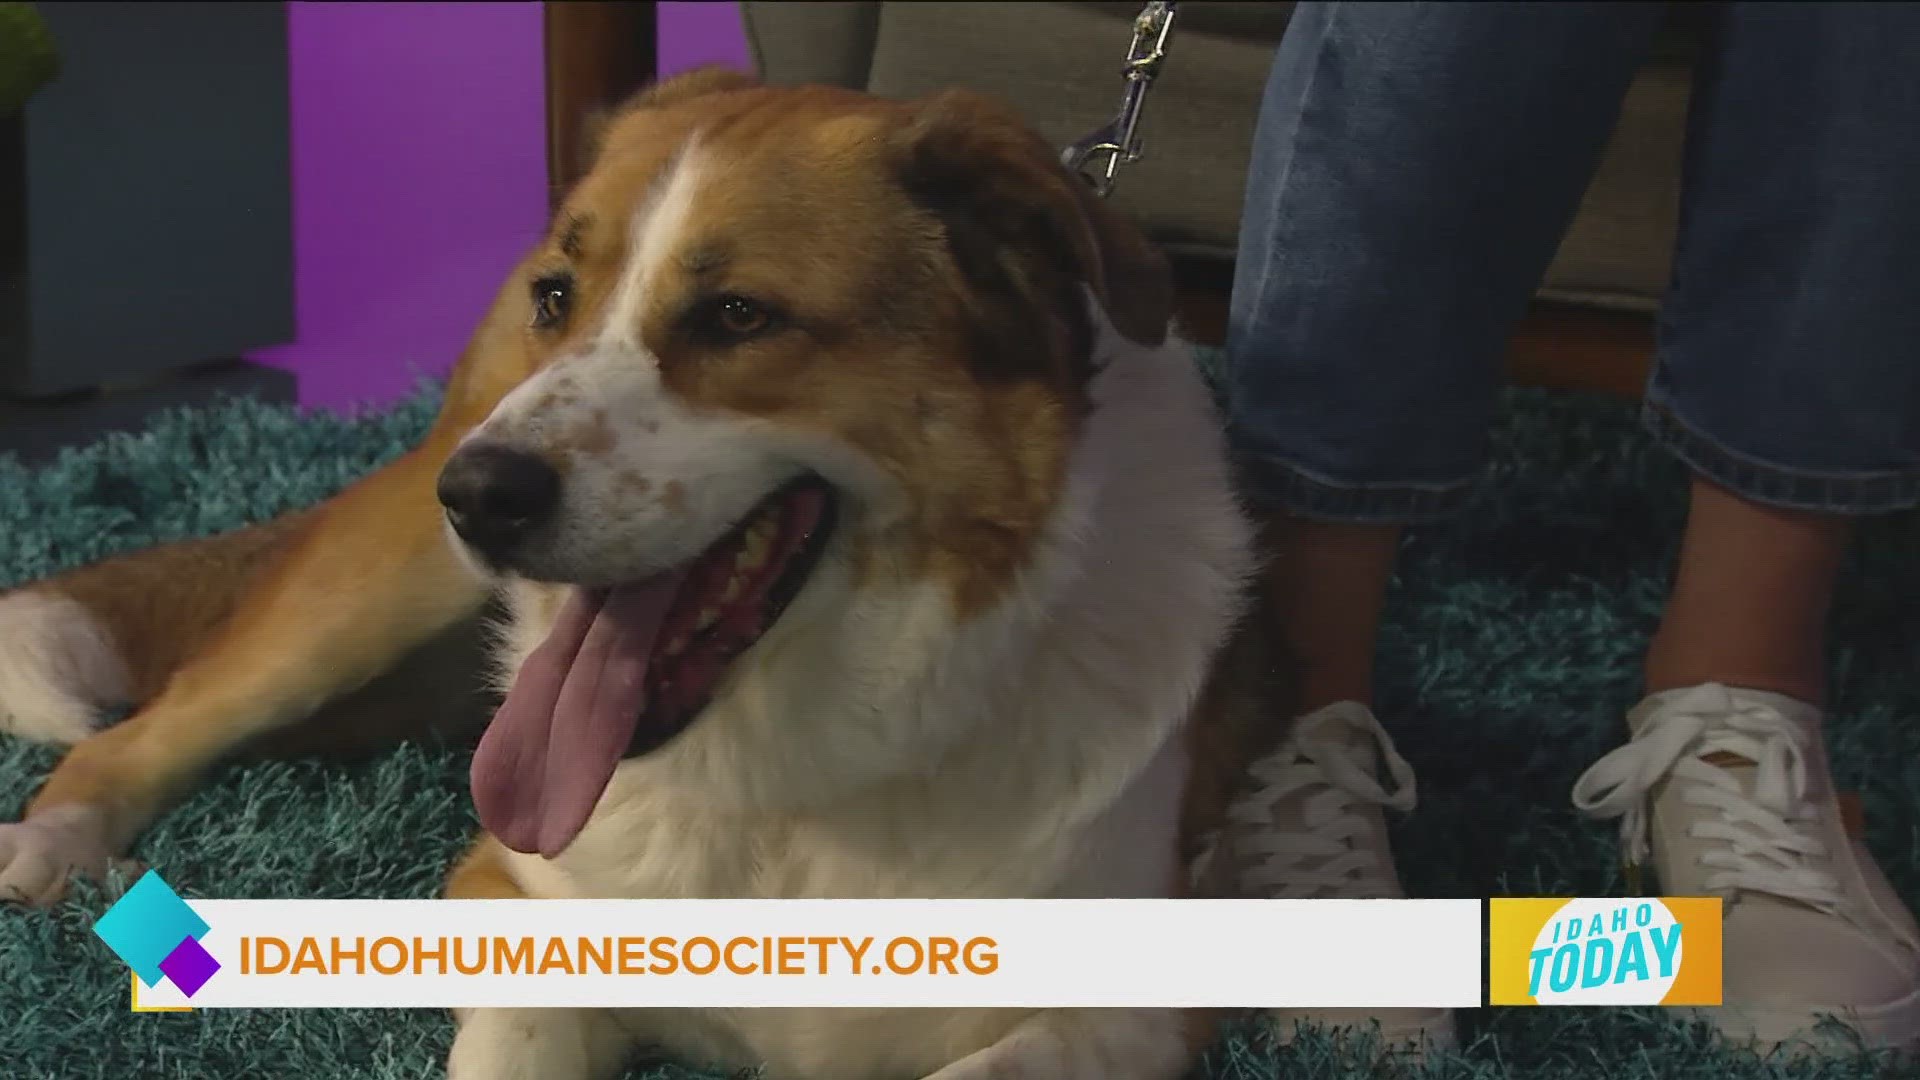 Our next adoptable pet is Maja a 6 year old Anatolian Shepherd / Mix. You can find her at https://idahohumanesociety.org/